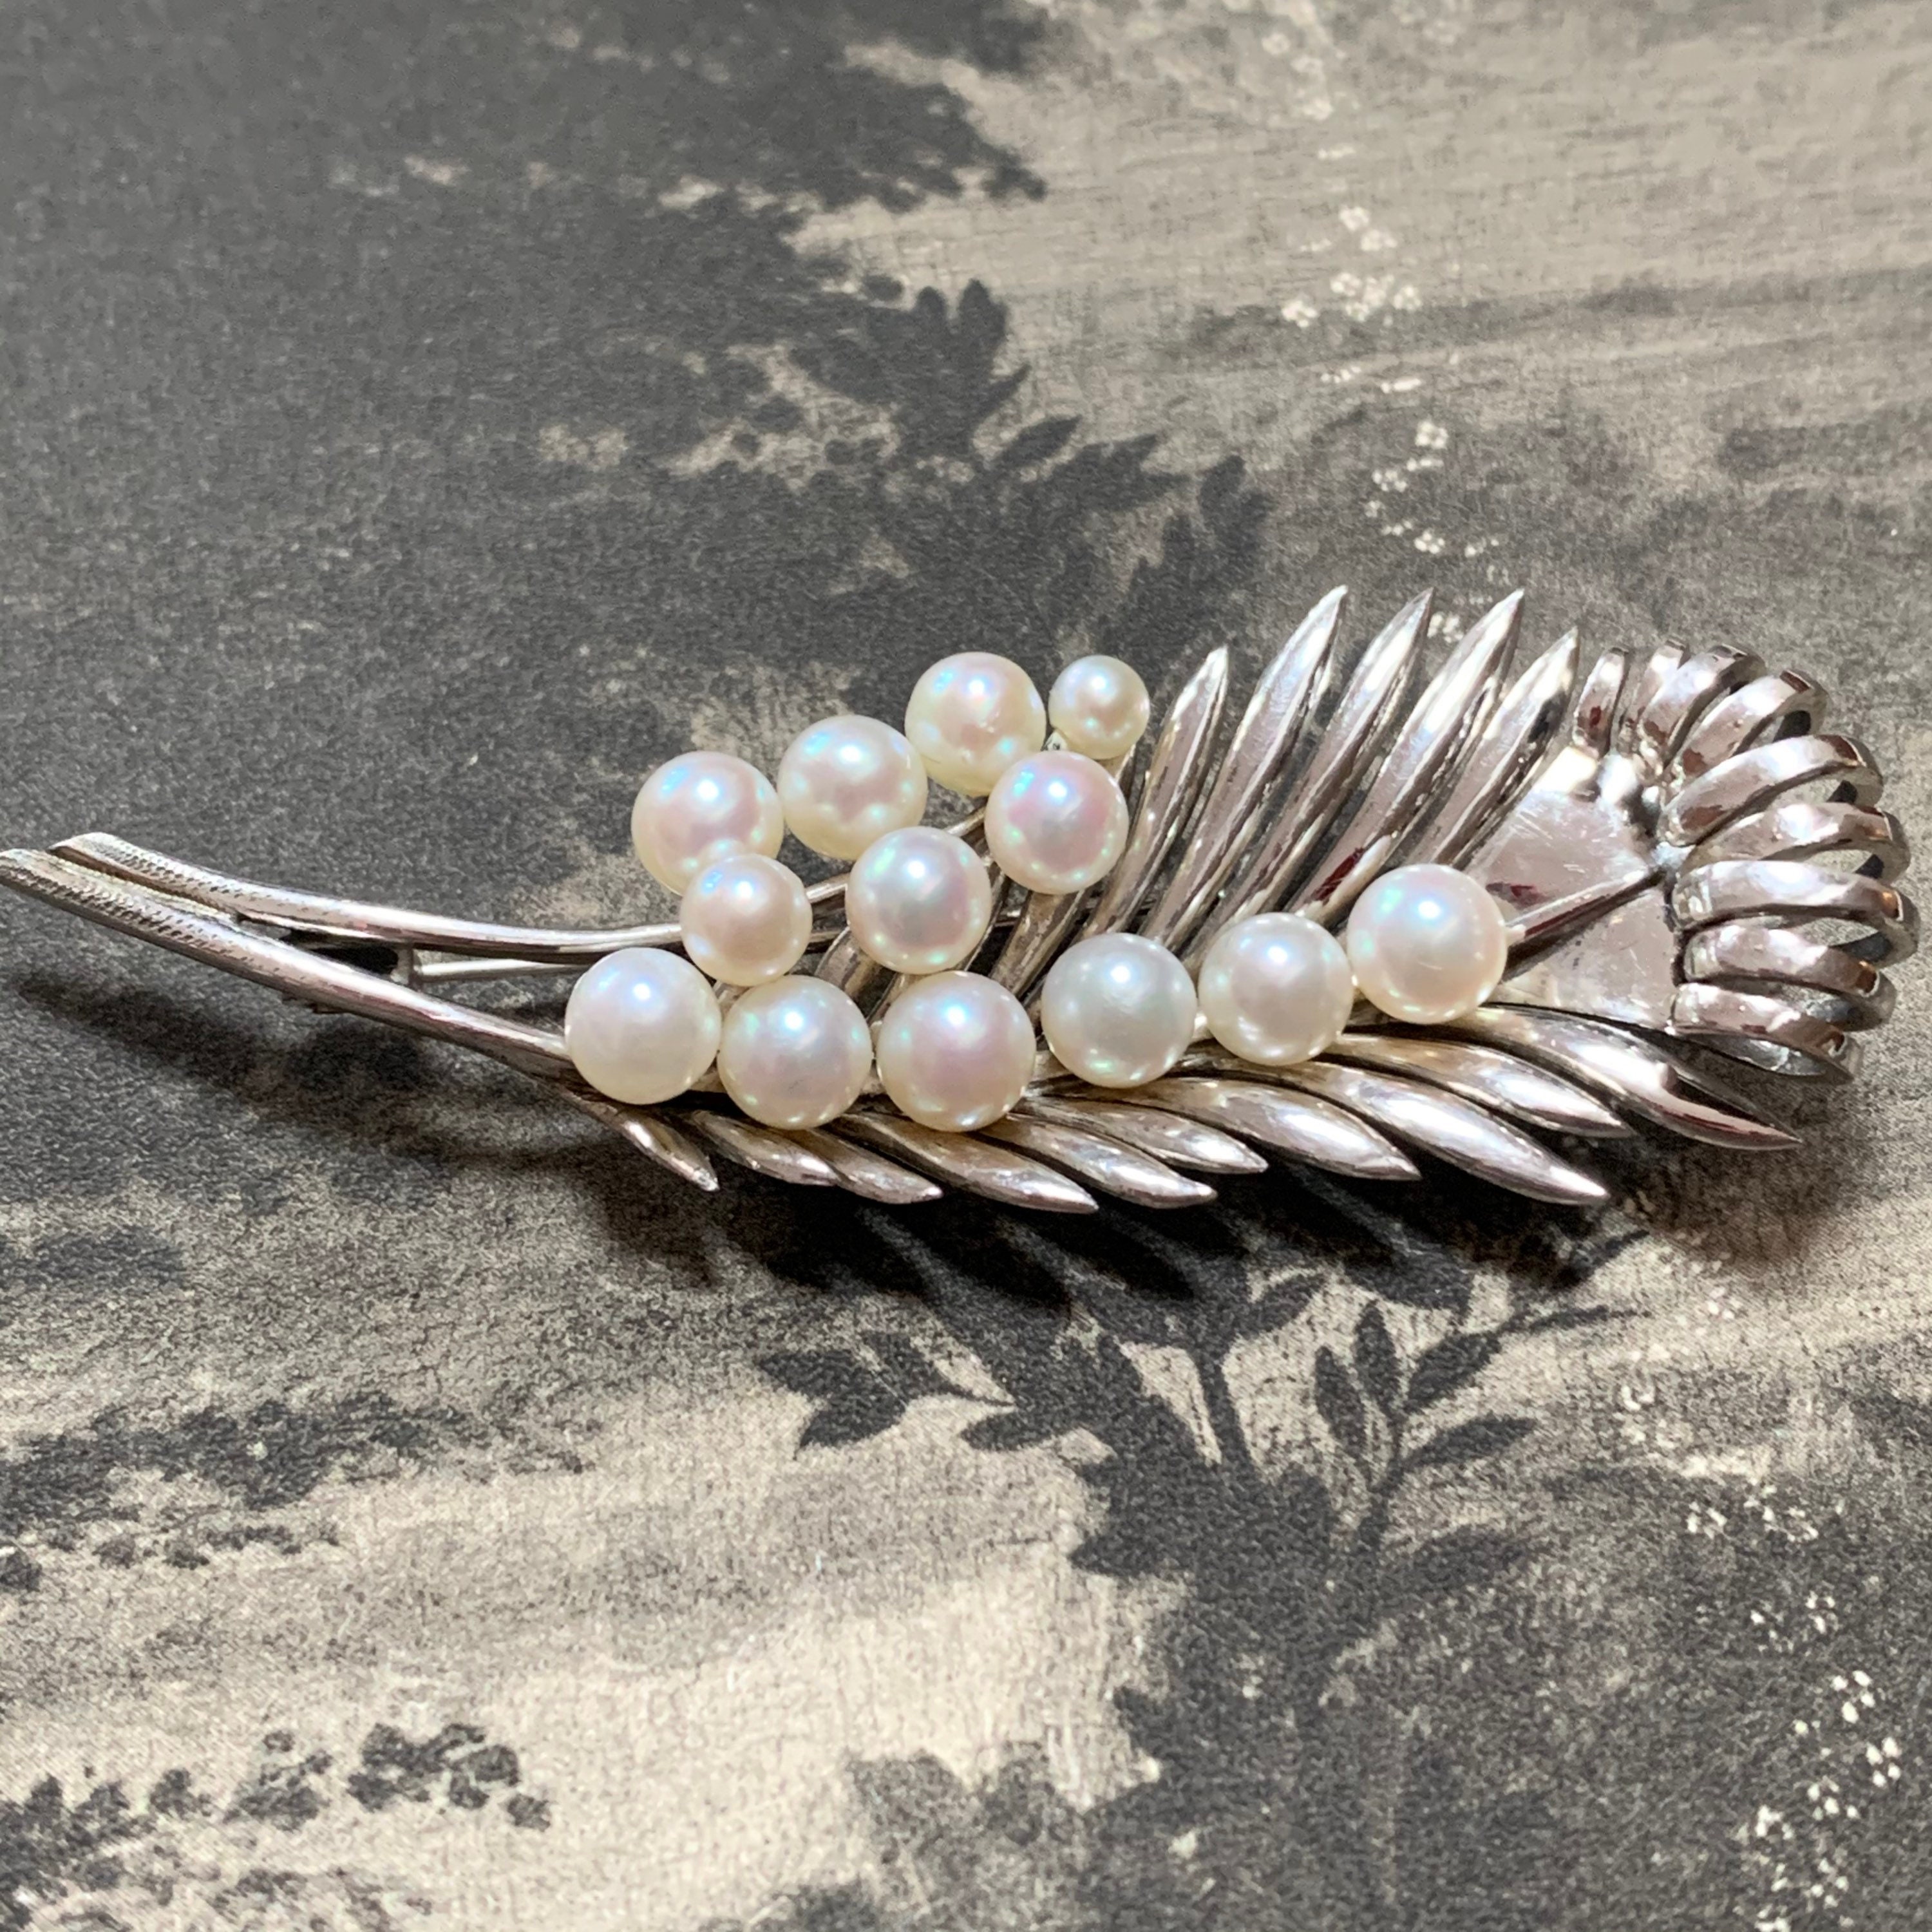 Silver Akoya Pearl Brooch Would Make The Perfect Gift. A Beautifully Crafted Vintage Mid Century Piece